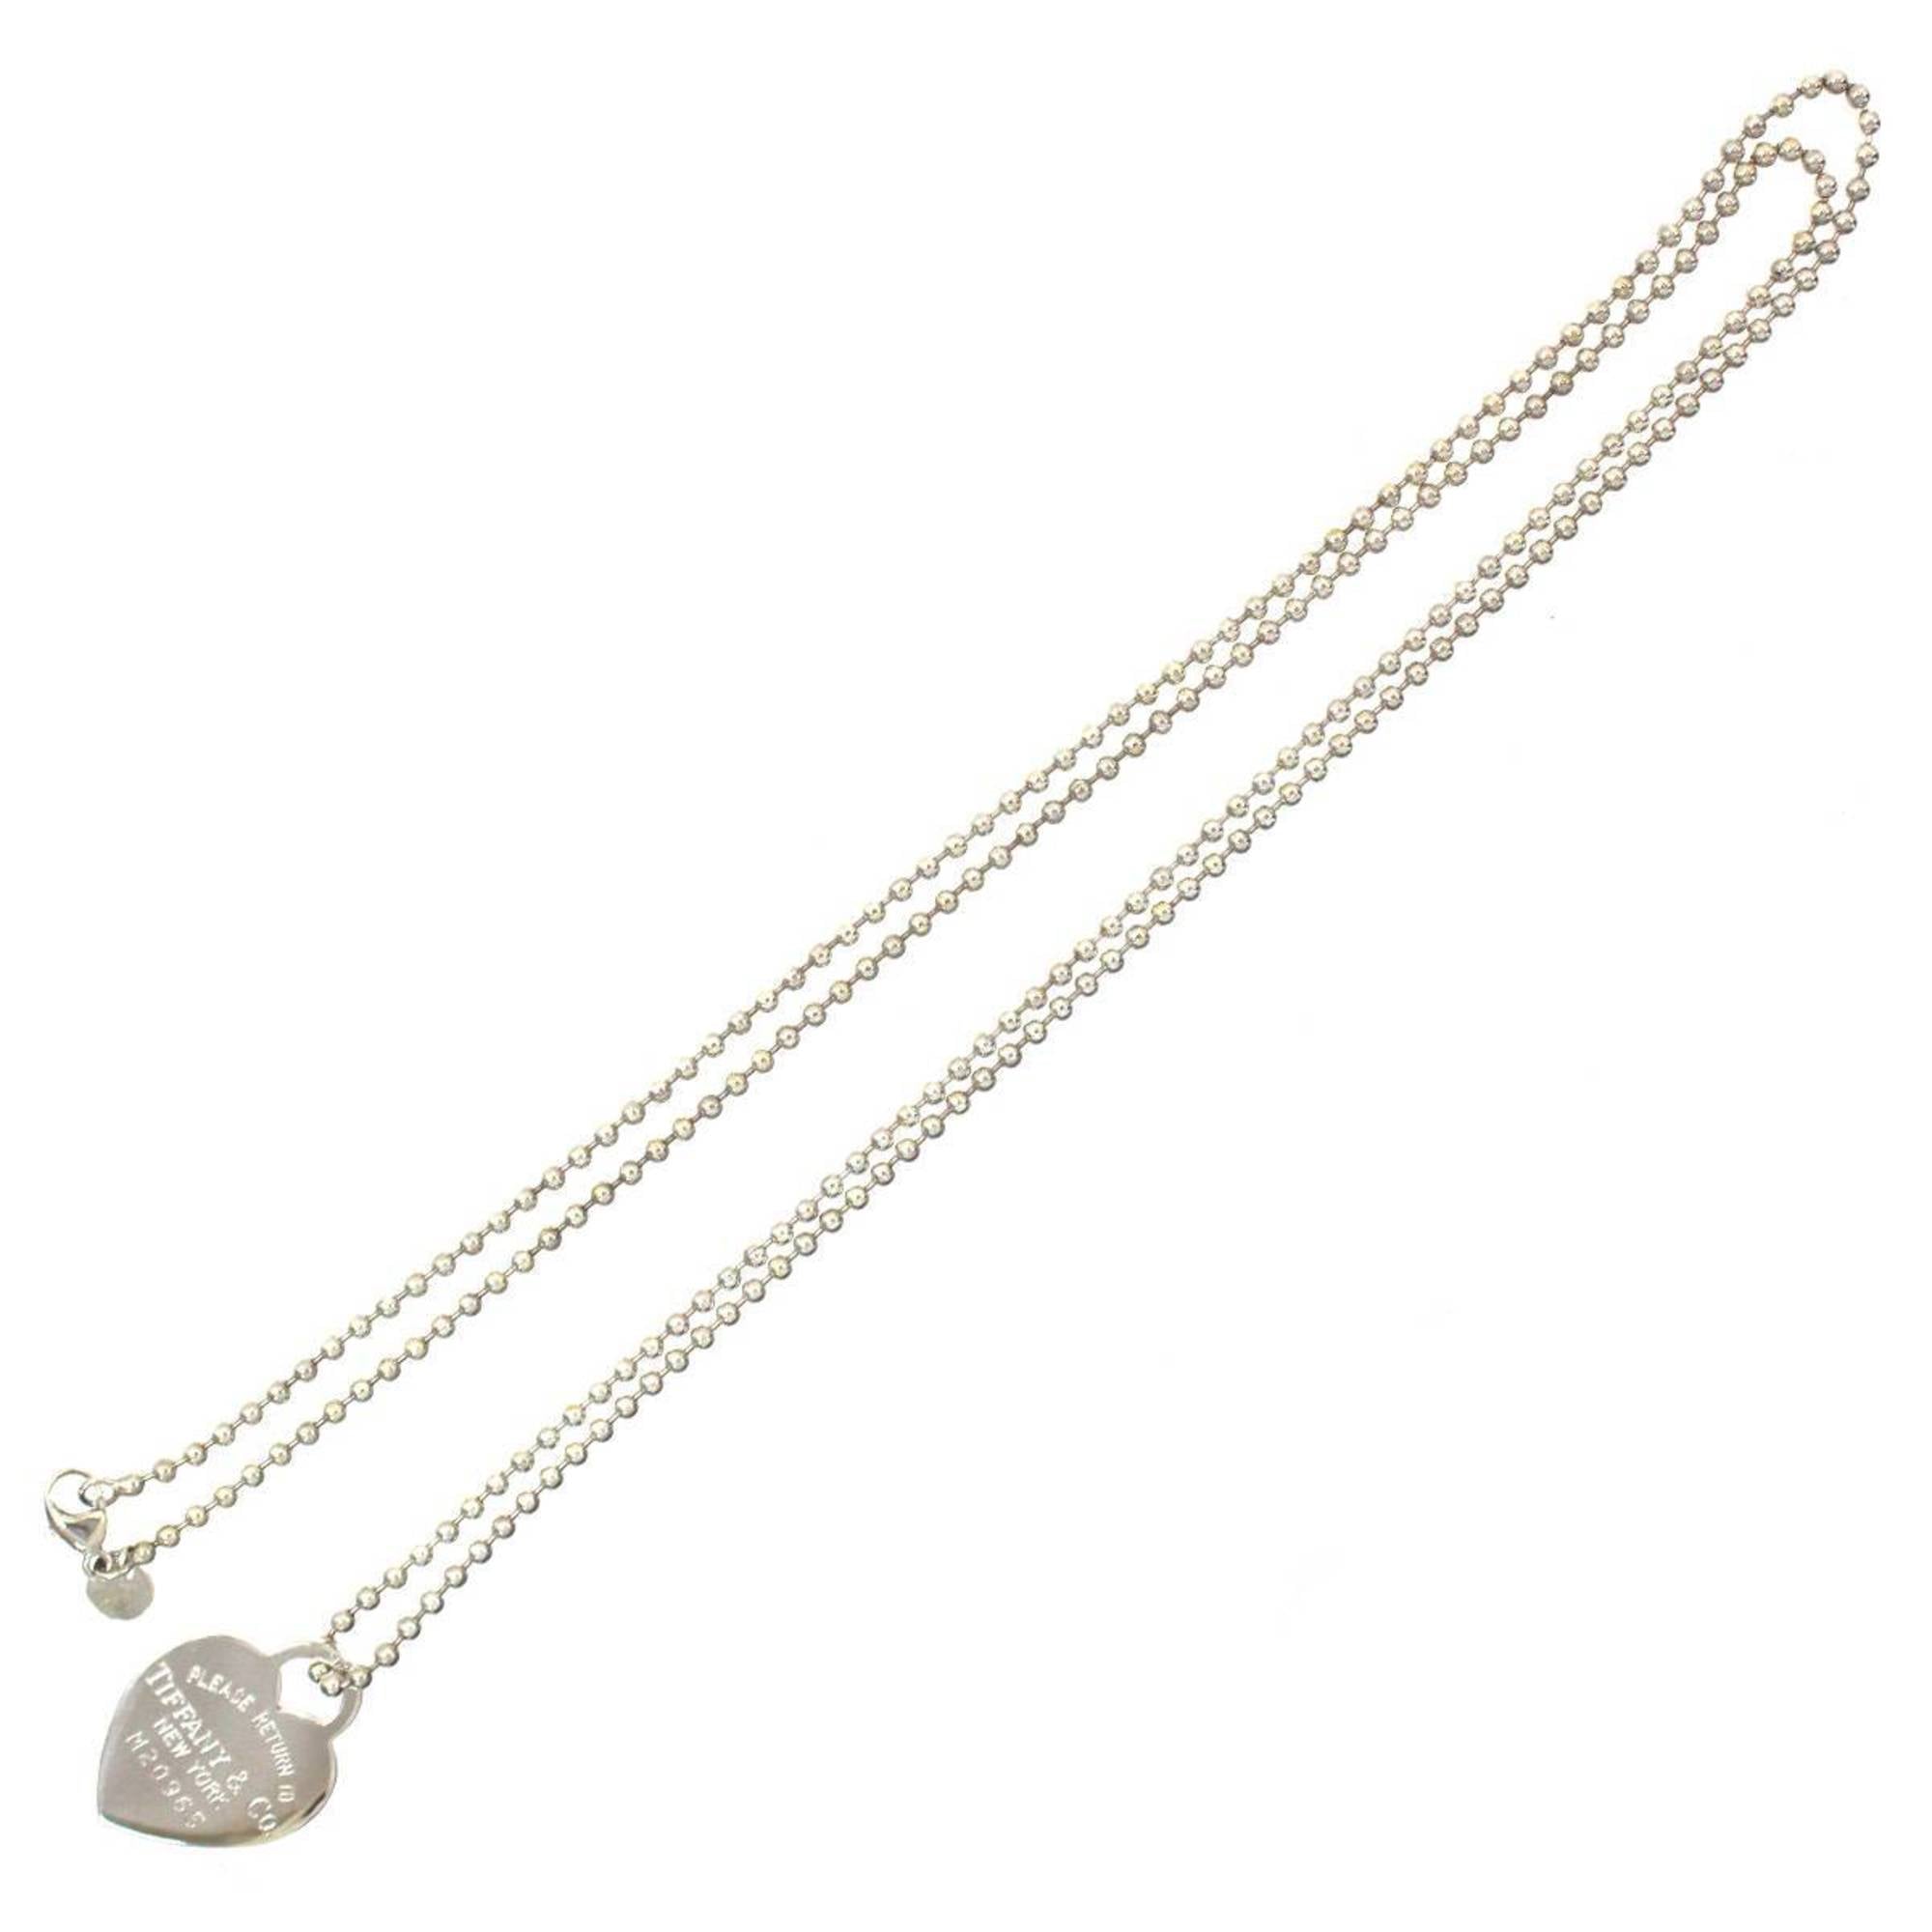 Authenticated Used Tiffany necklace return to heart tag pendant ball chain  silver 925 Tiffany&Co - Walmart.com